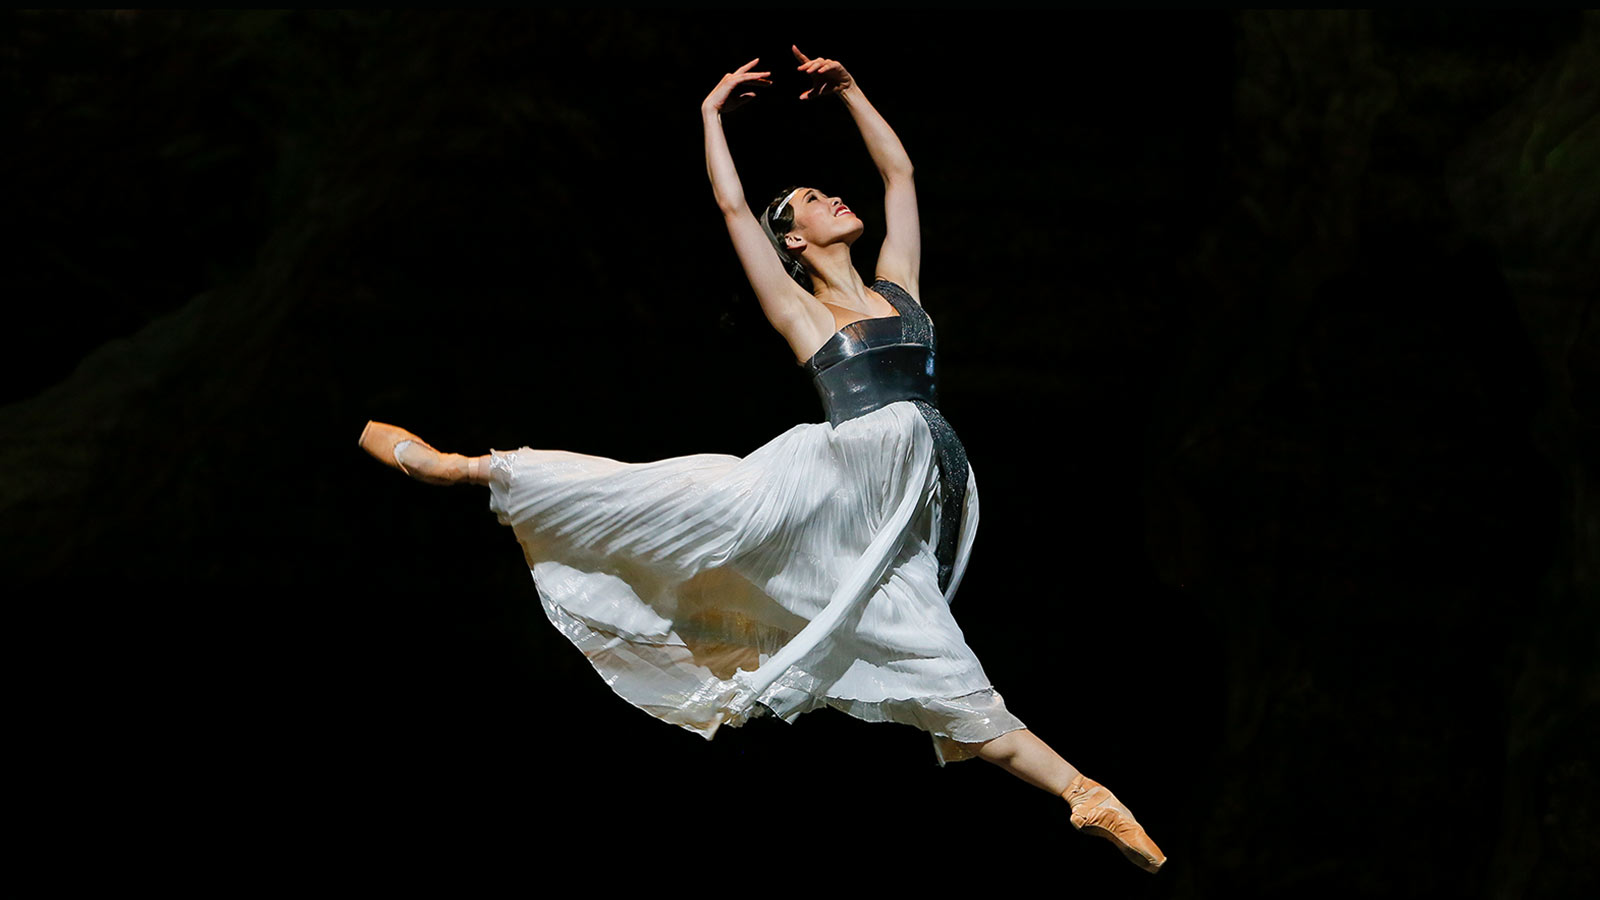 A woman in a white dress leaping with her hands above her head.